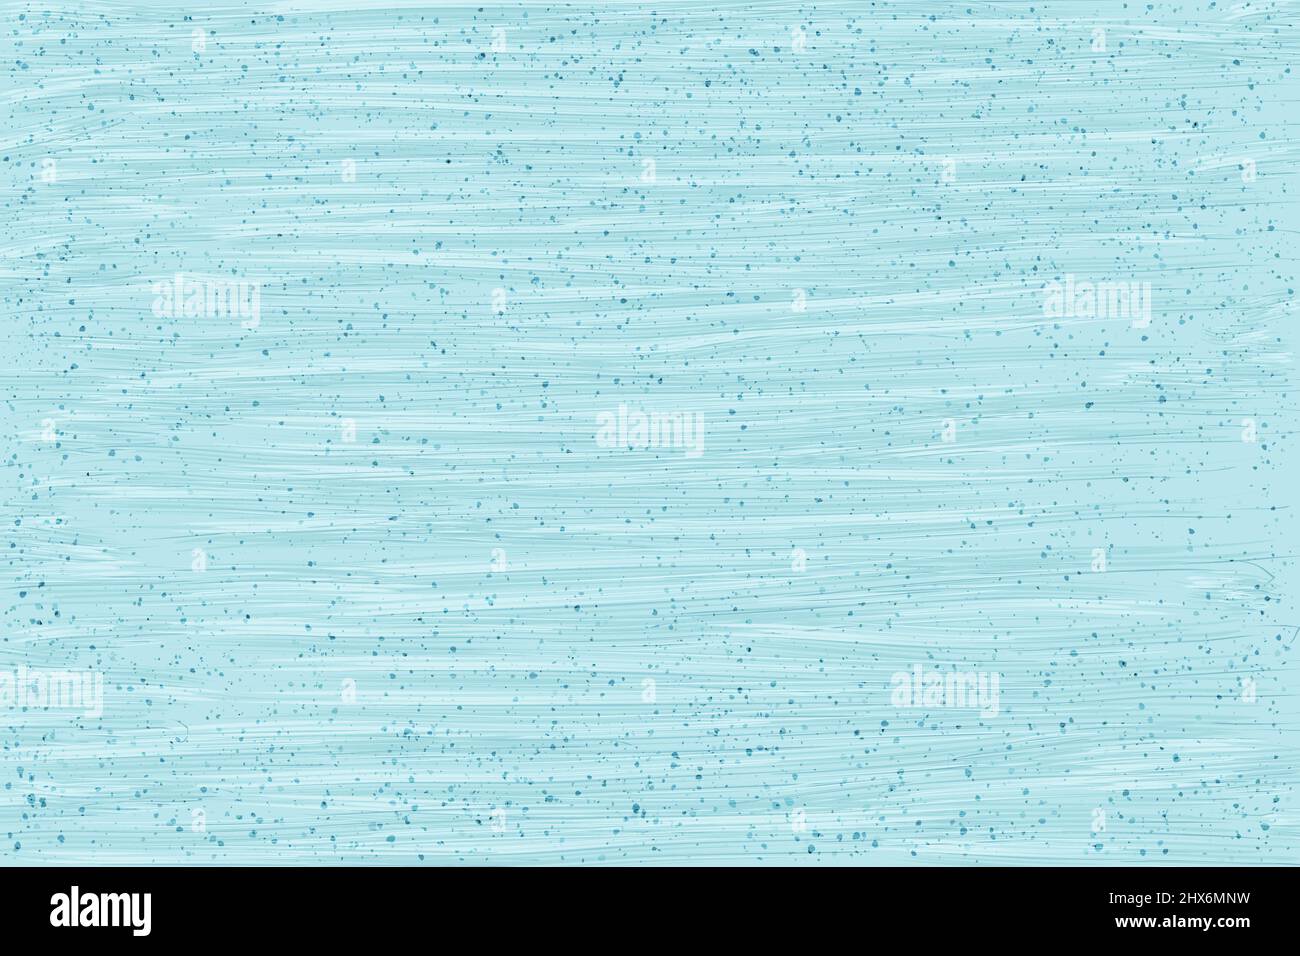 Delicate powder blue background with abstract dots. Stock Photo